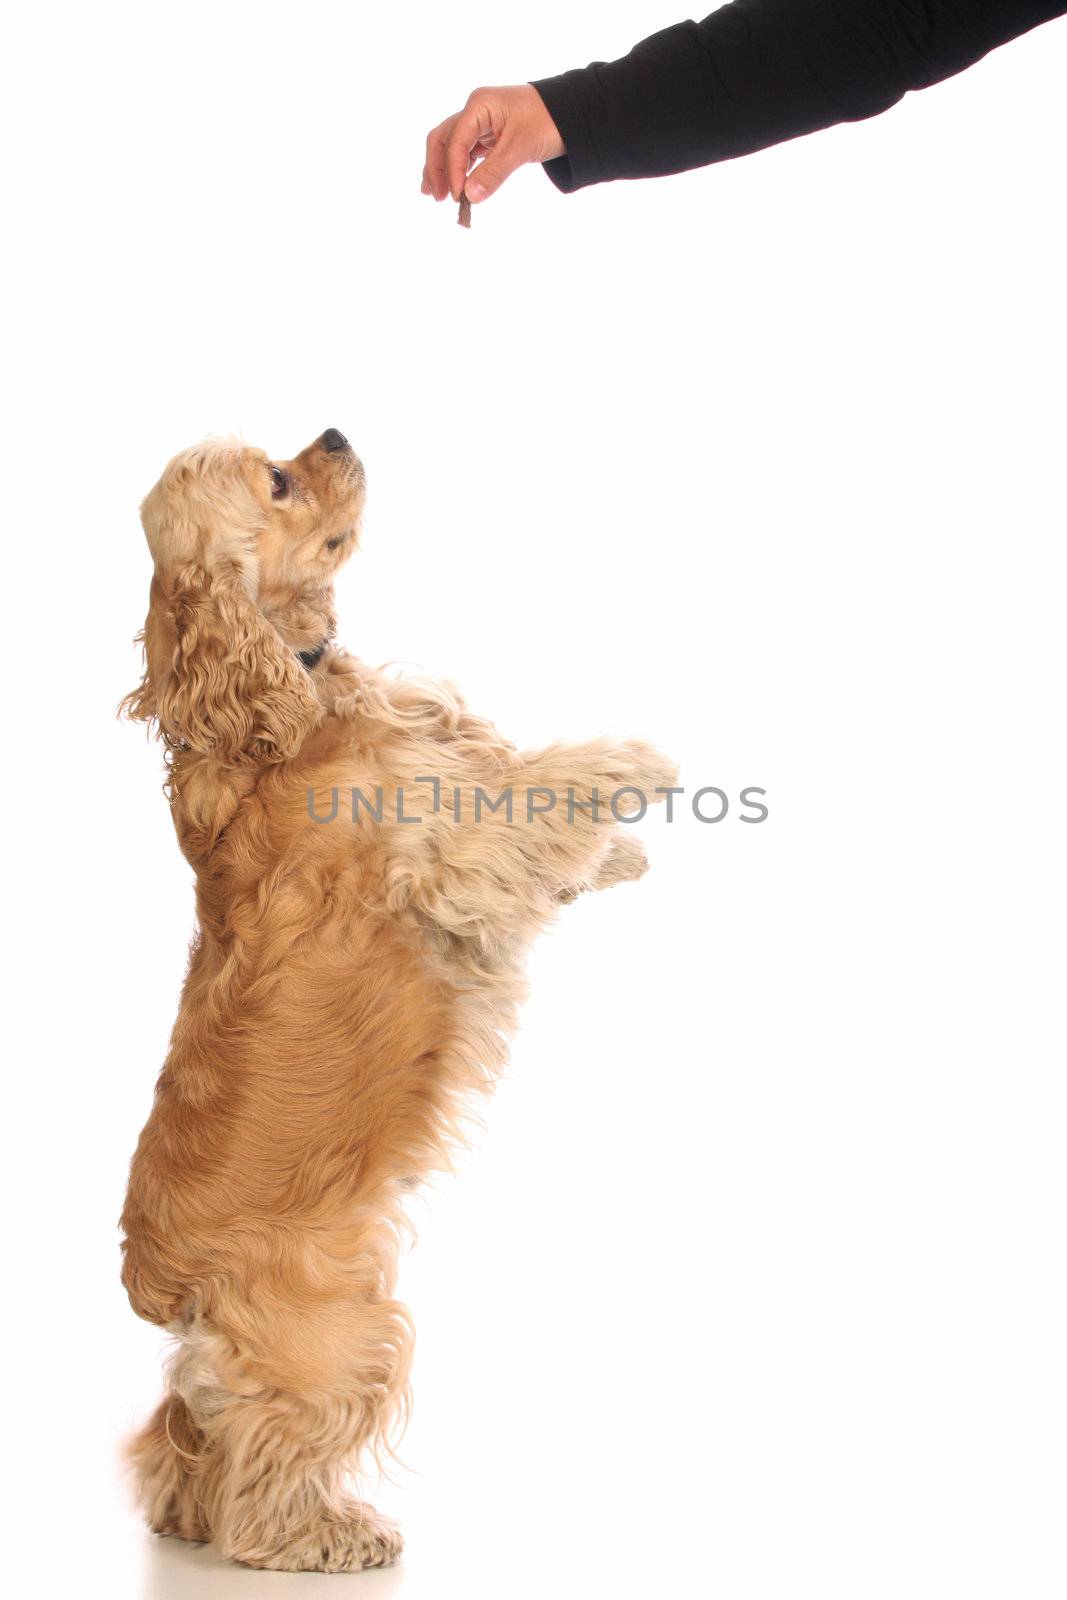 Hand feeding cooky American Cocker Spaniel, isolated on white background